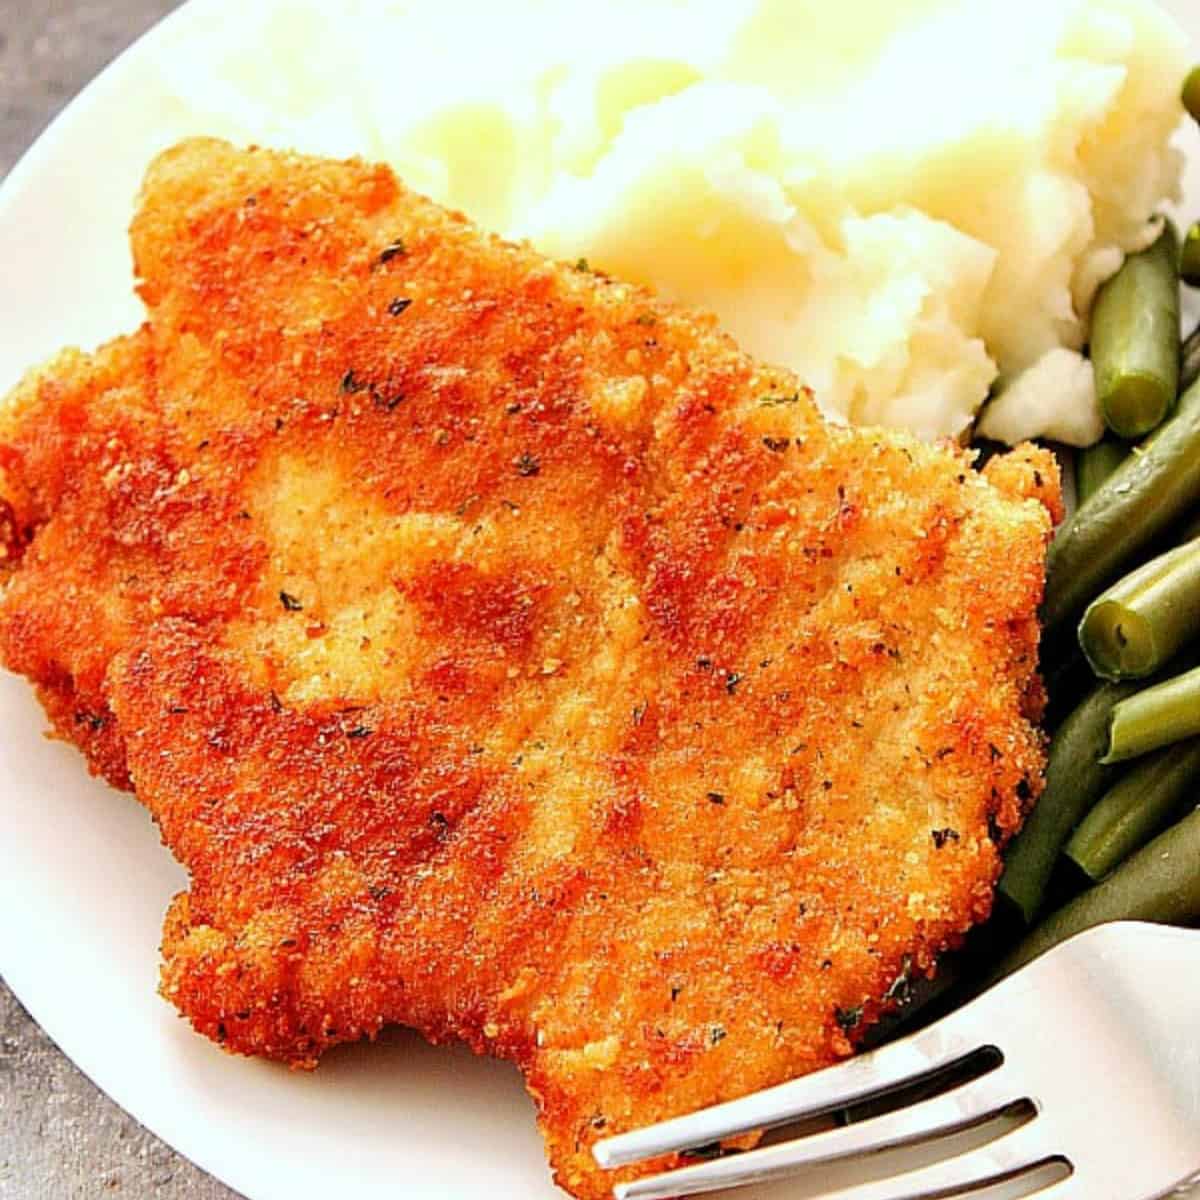 Schnitzel with mashed potatoes on a plate.